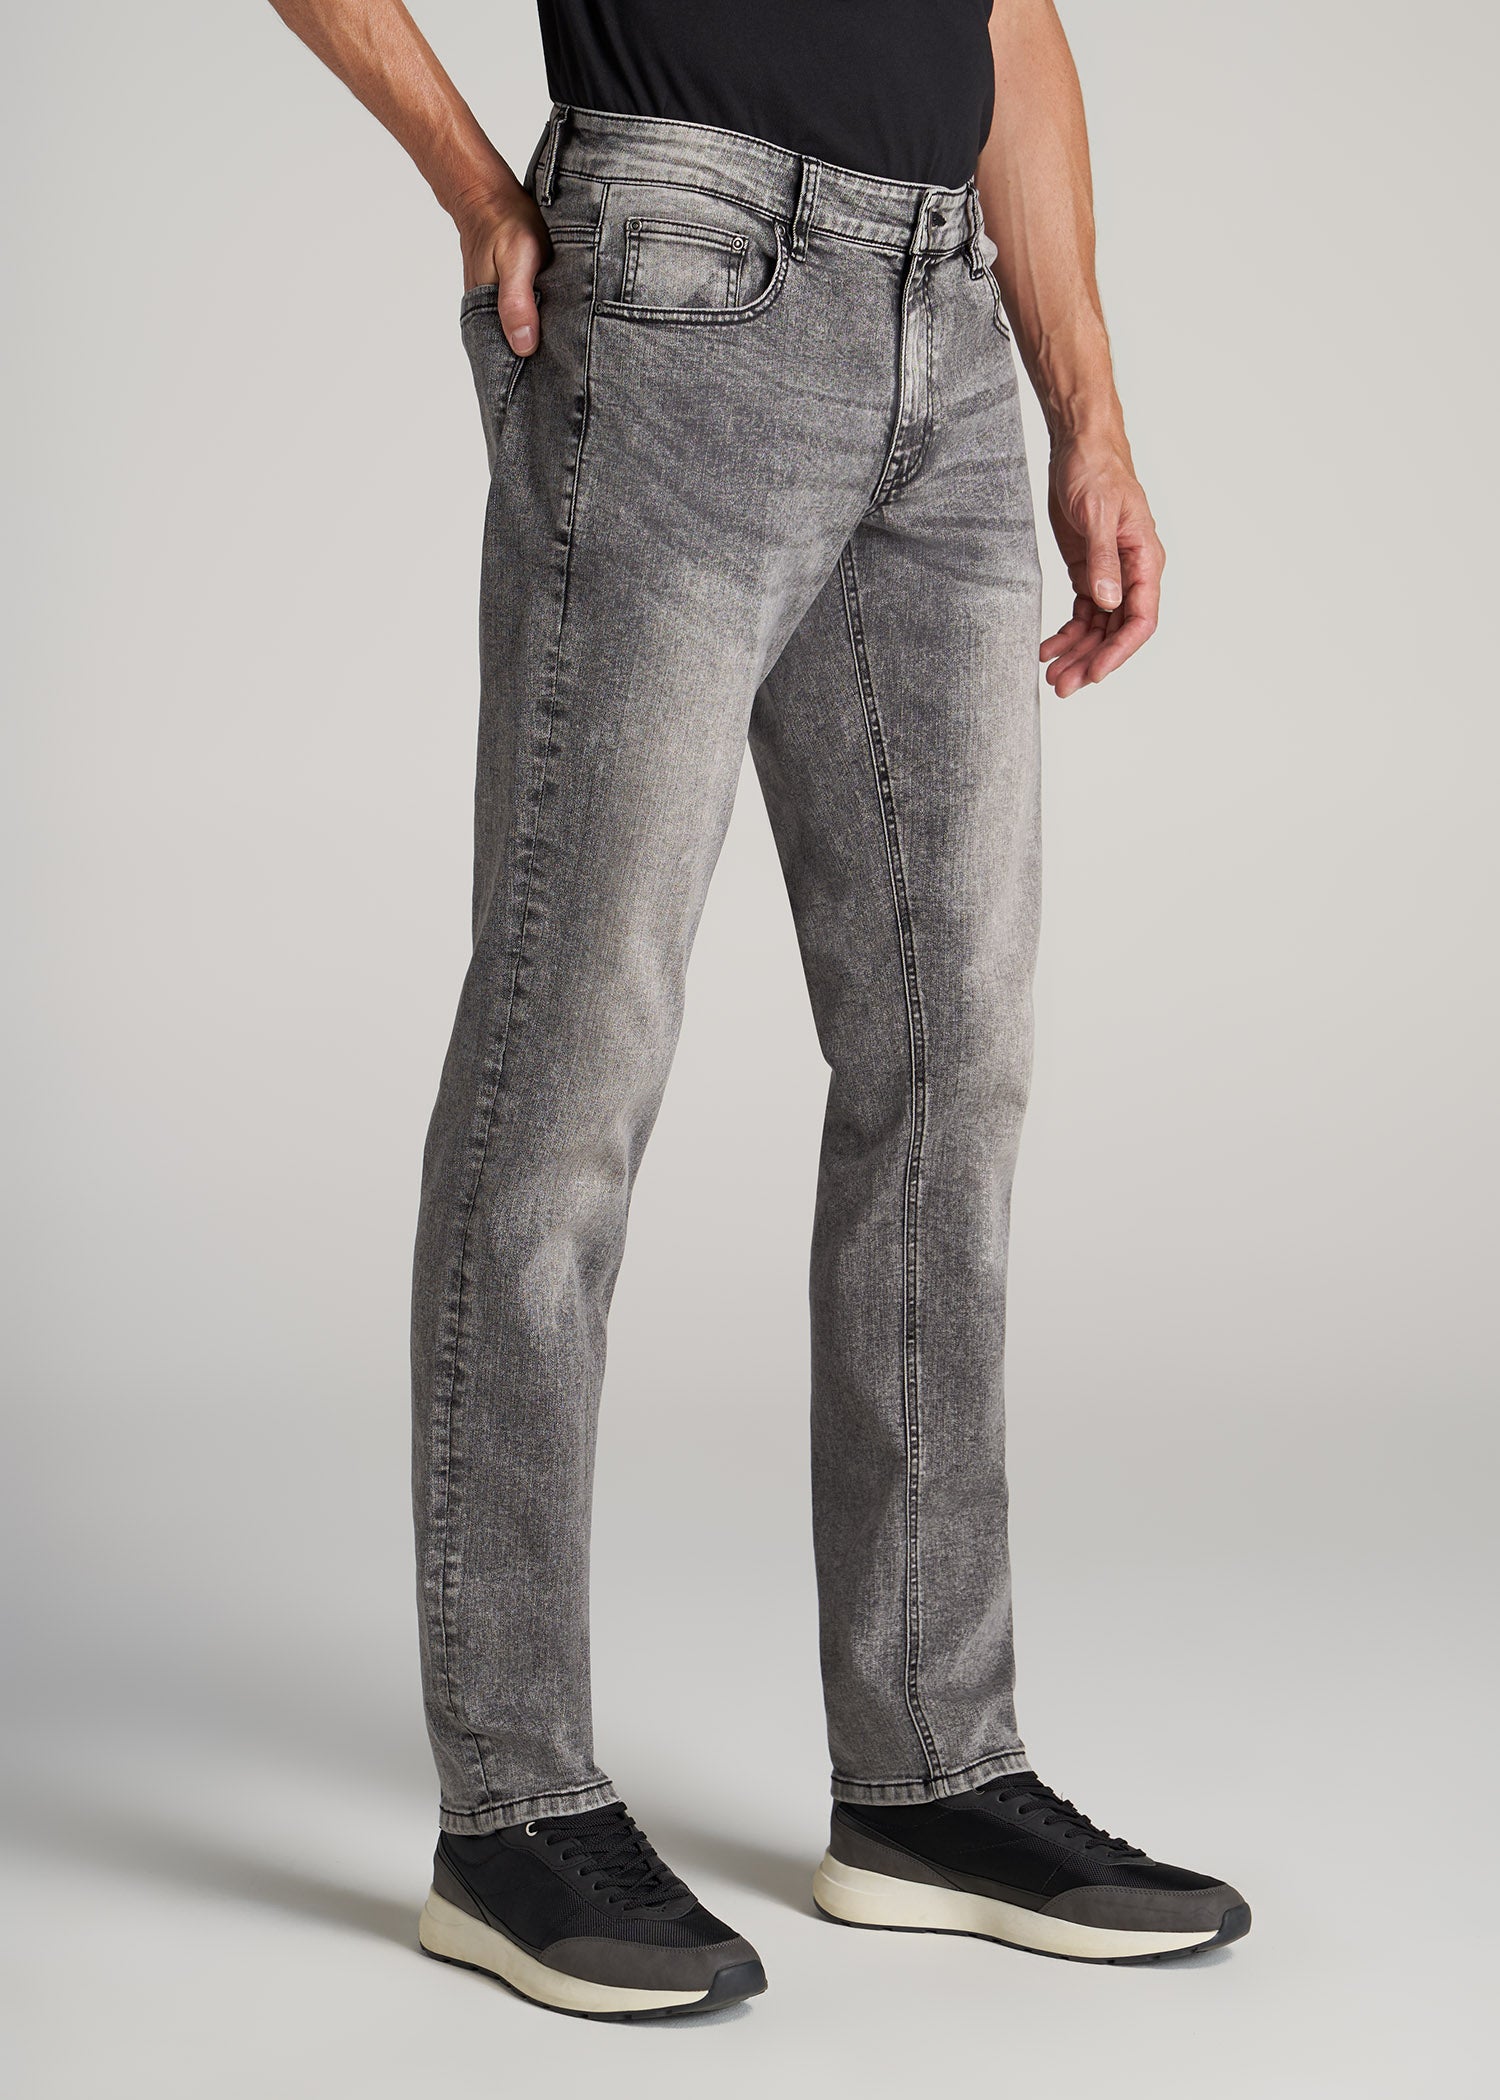    American-Tall-Men-Carman-Tapered-Fit-Jeans-Washed-Faded-Black-side